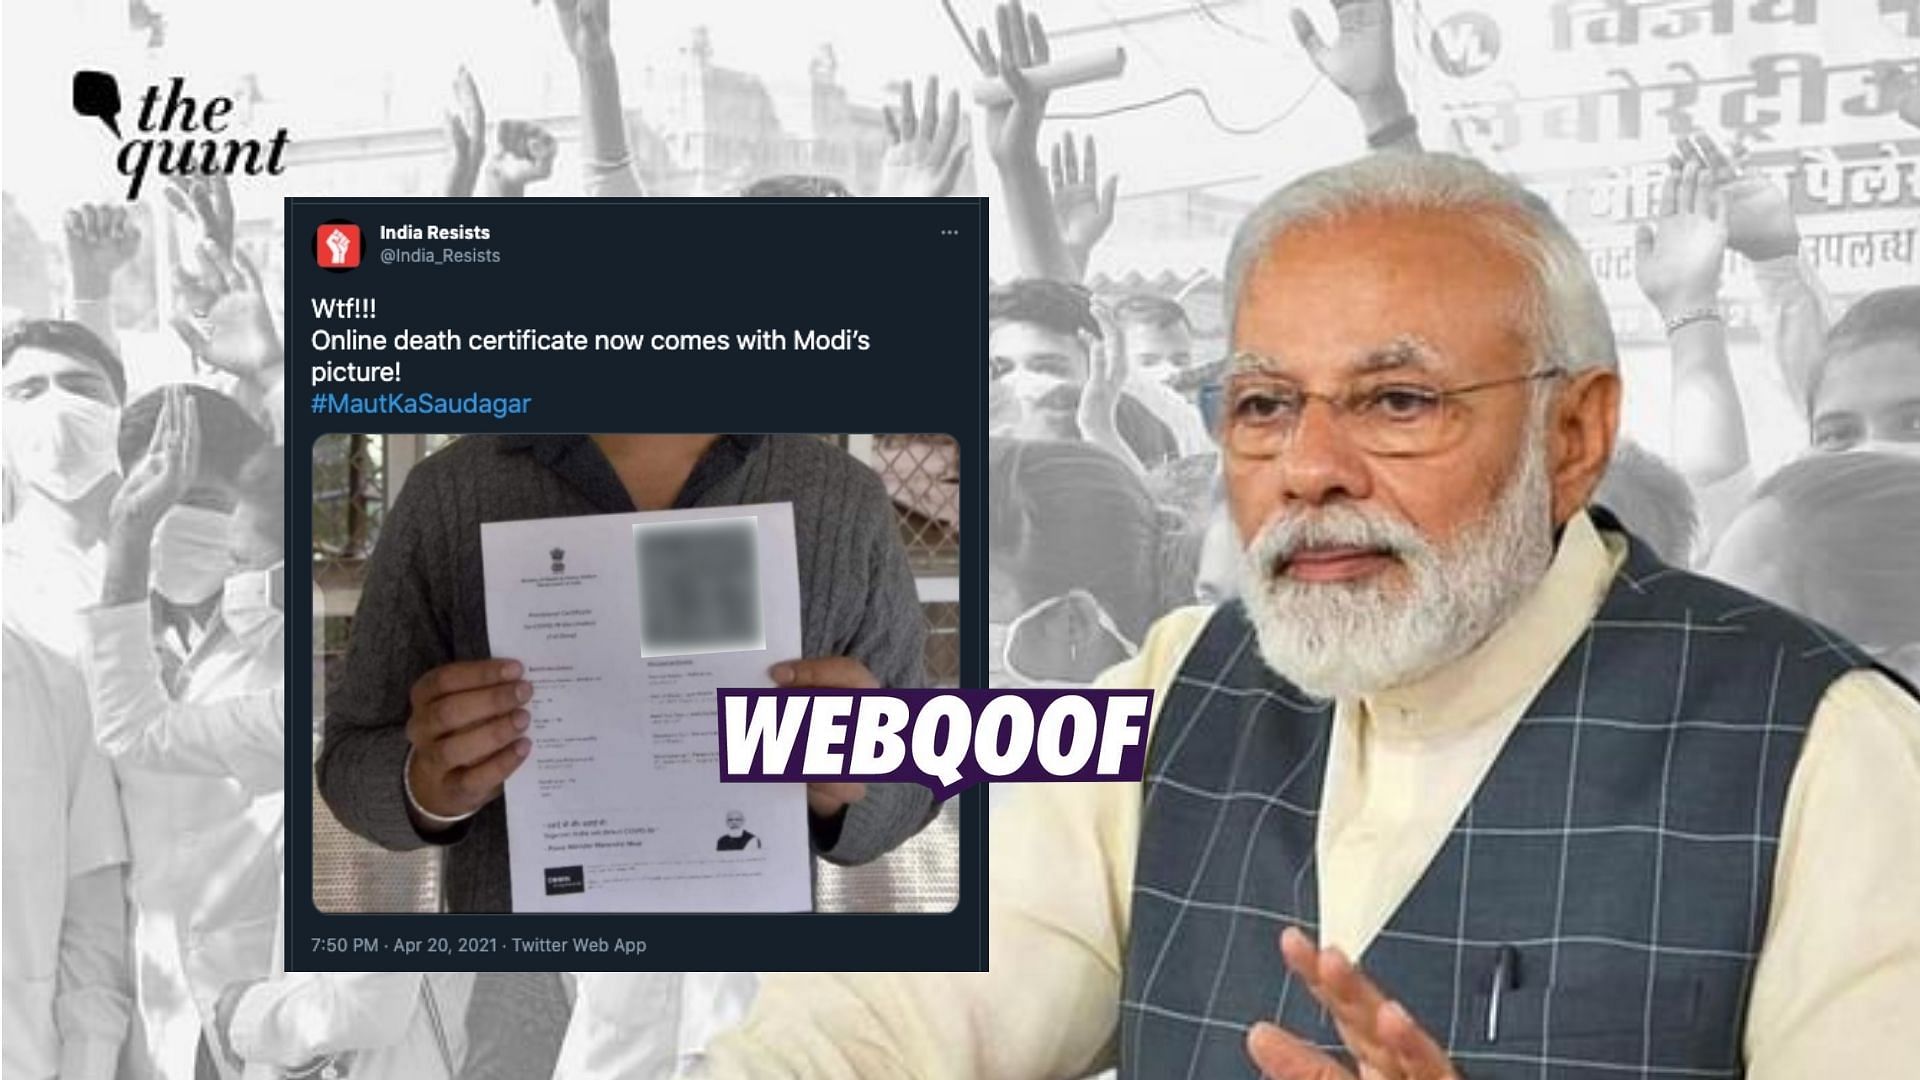 Image of a COVID-19 vaccination certificate is being shared with a claim that the online death certificate now comes with an image of PM Modi printed on it.